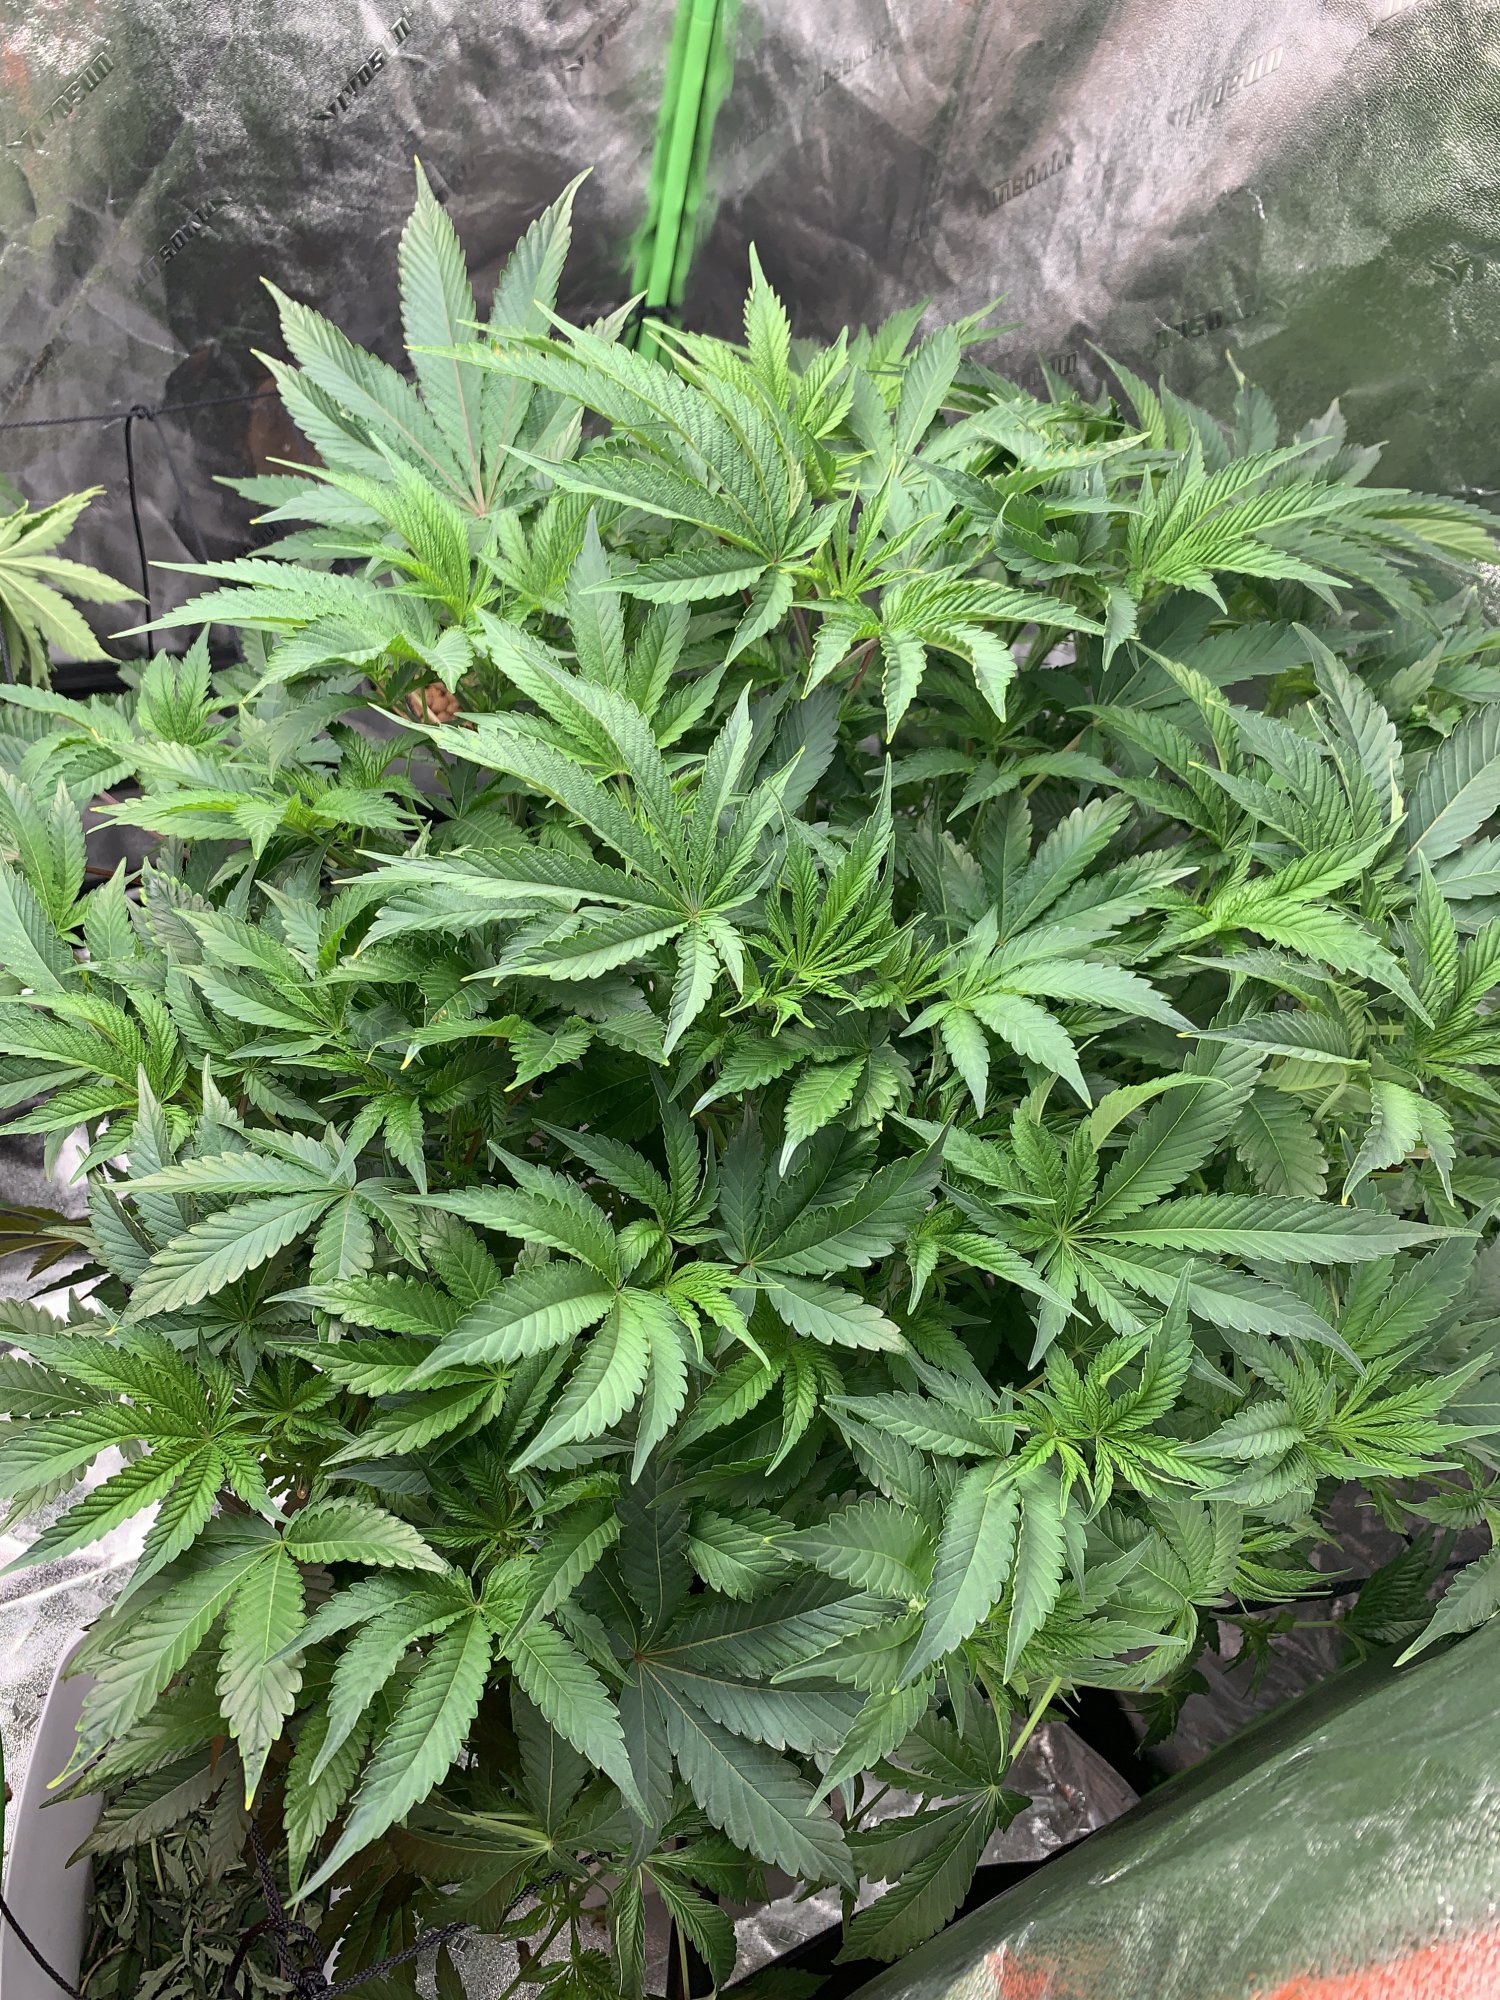 Rdwc platinum granddaddy purple and her unknown roommate 3